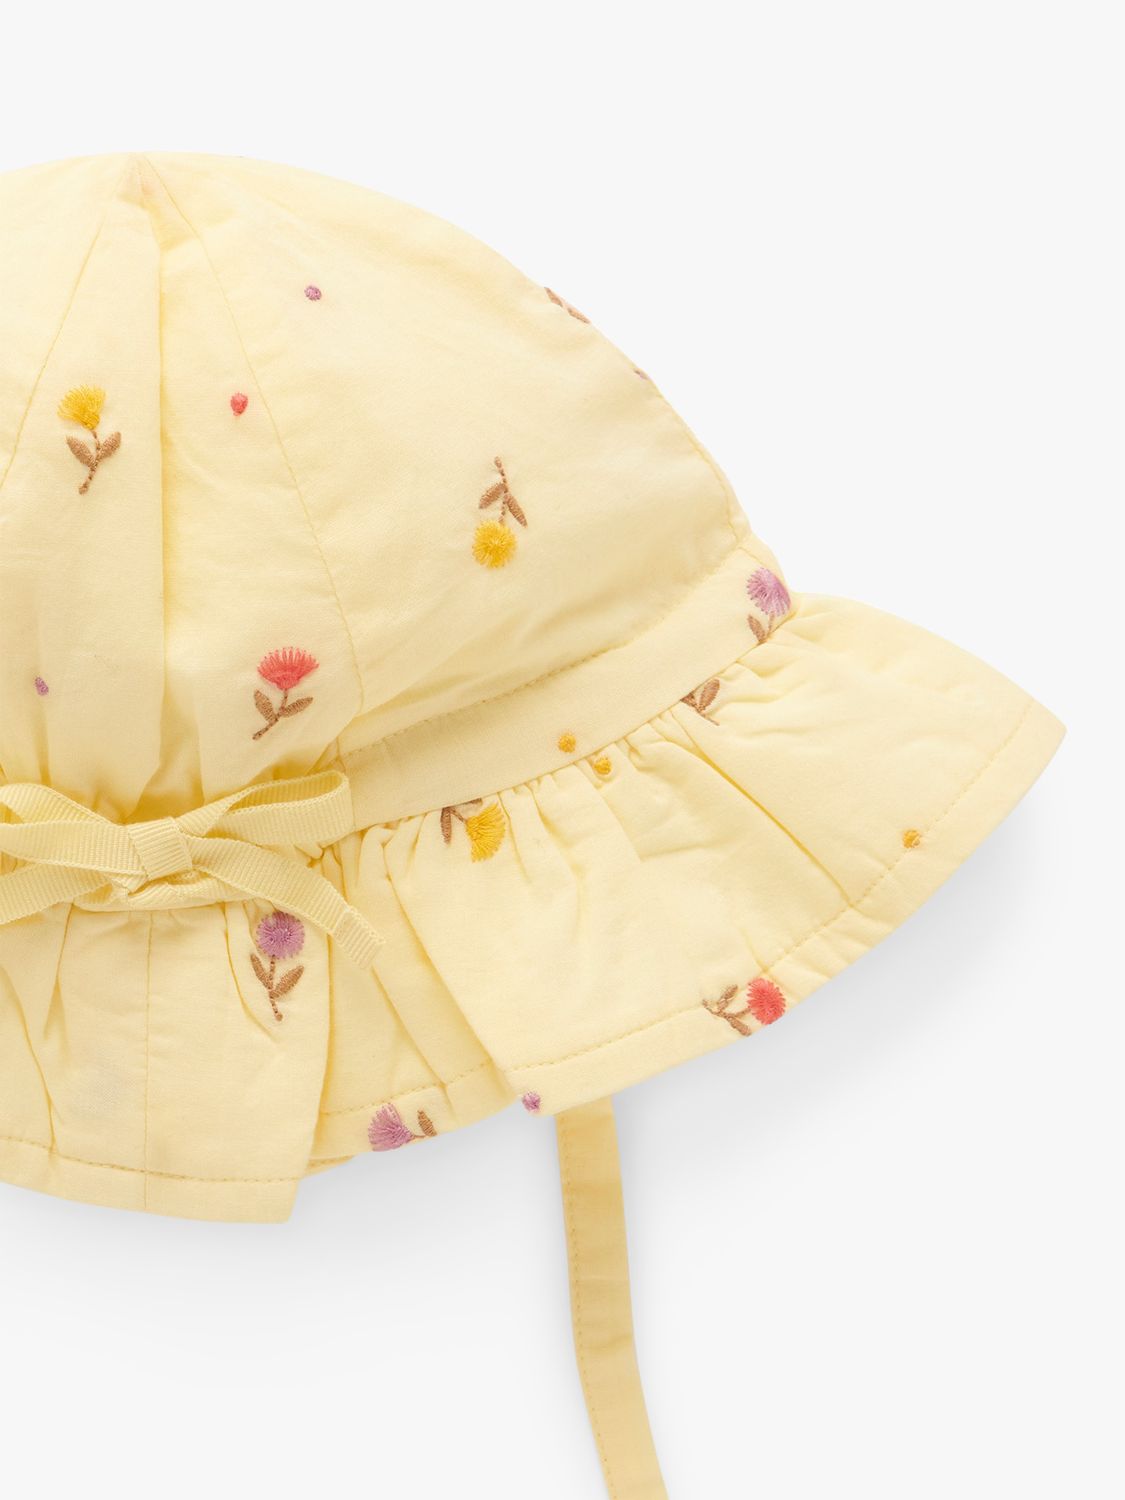 Purebaby Baby Tufted Floral Embroidered Sun Hat, Yellow/Multi, 6-12 months